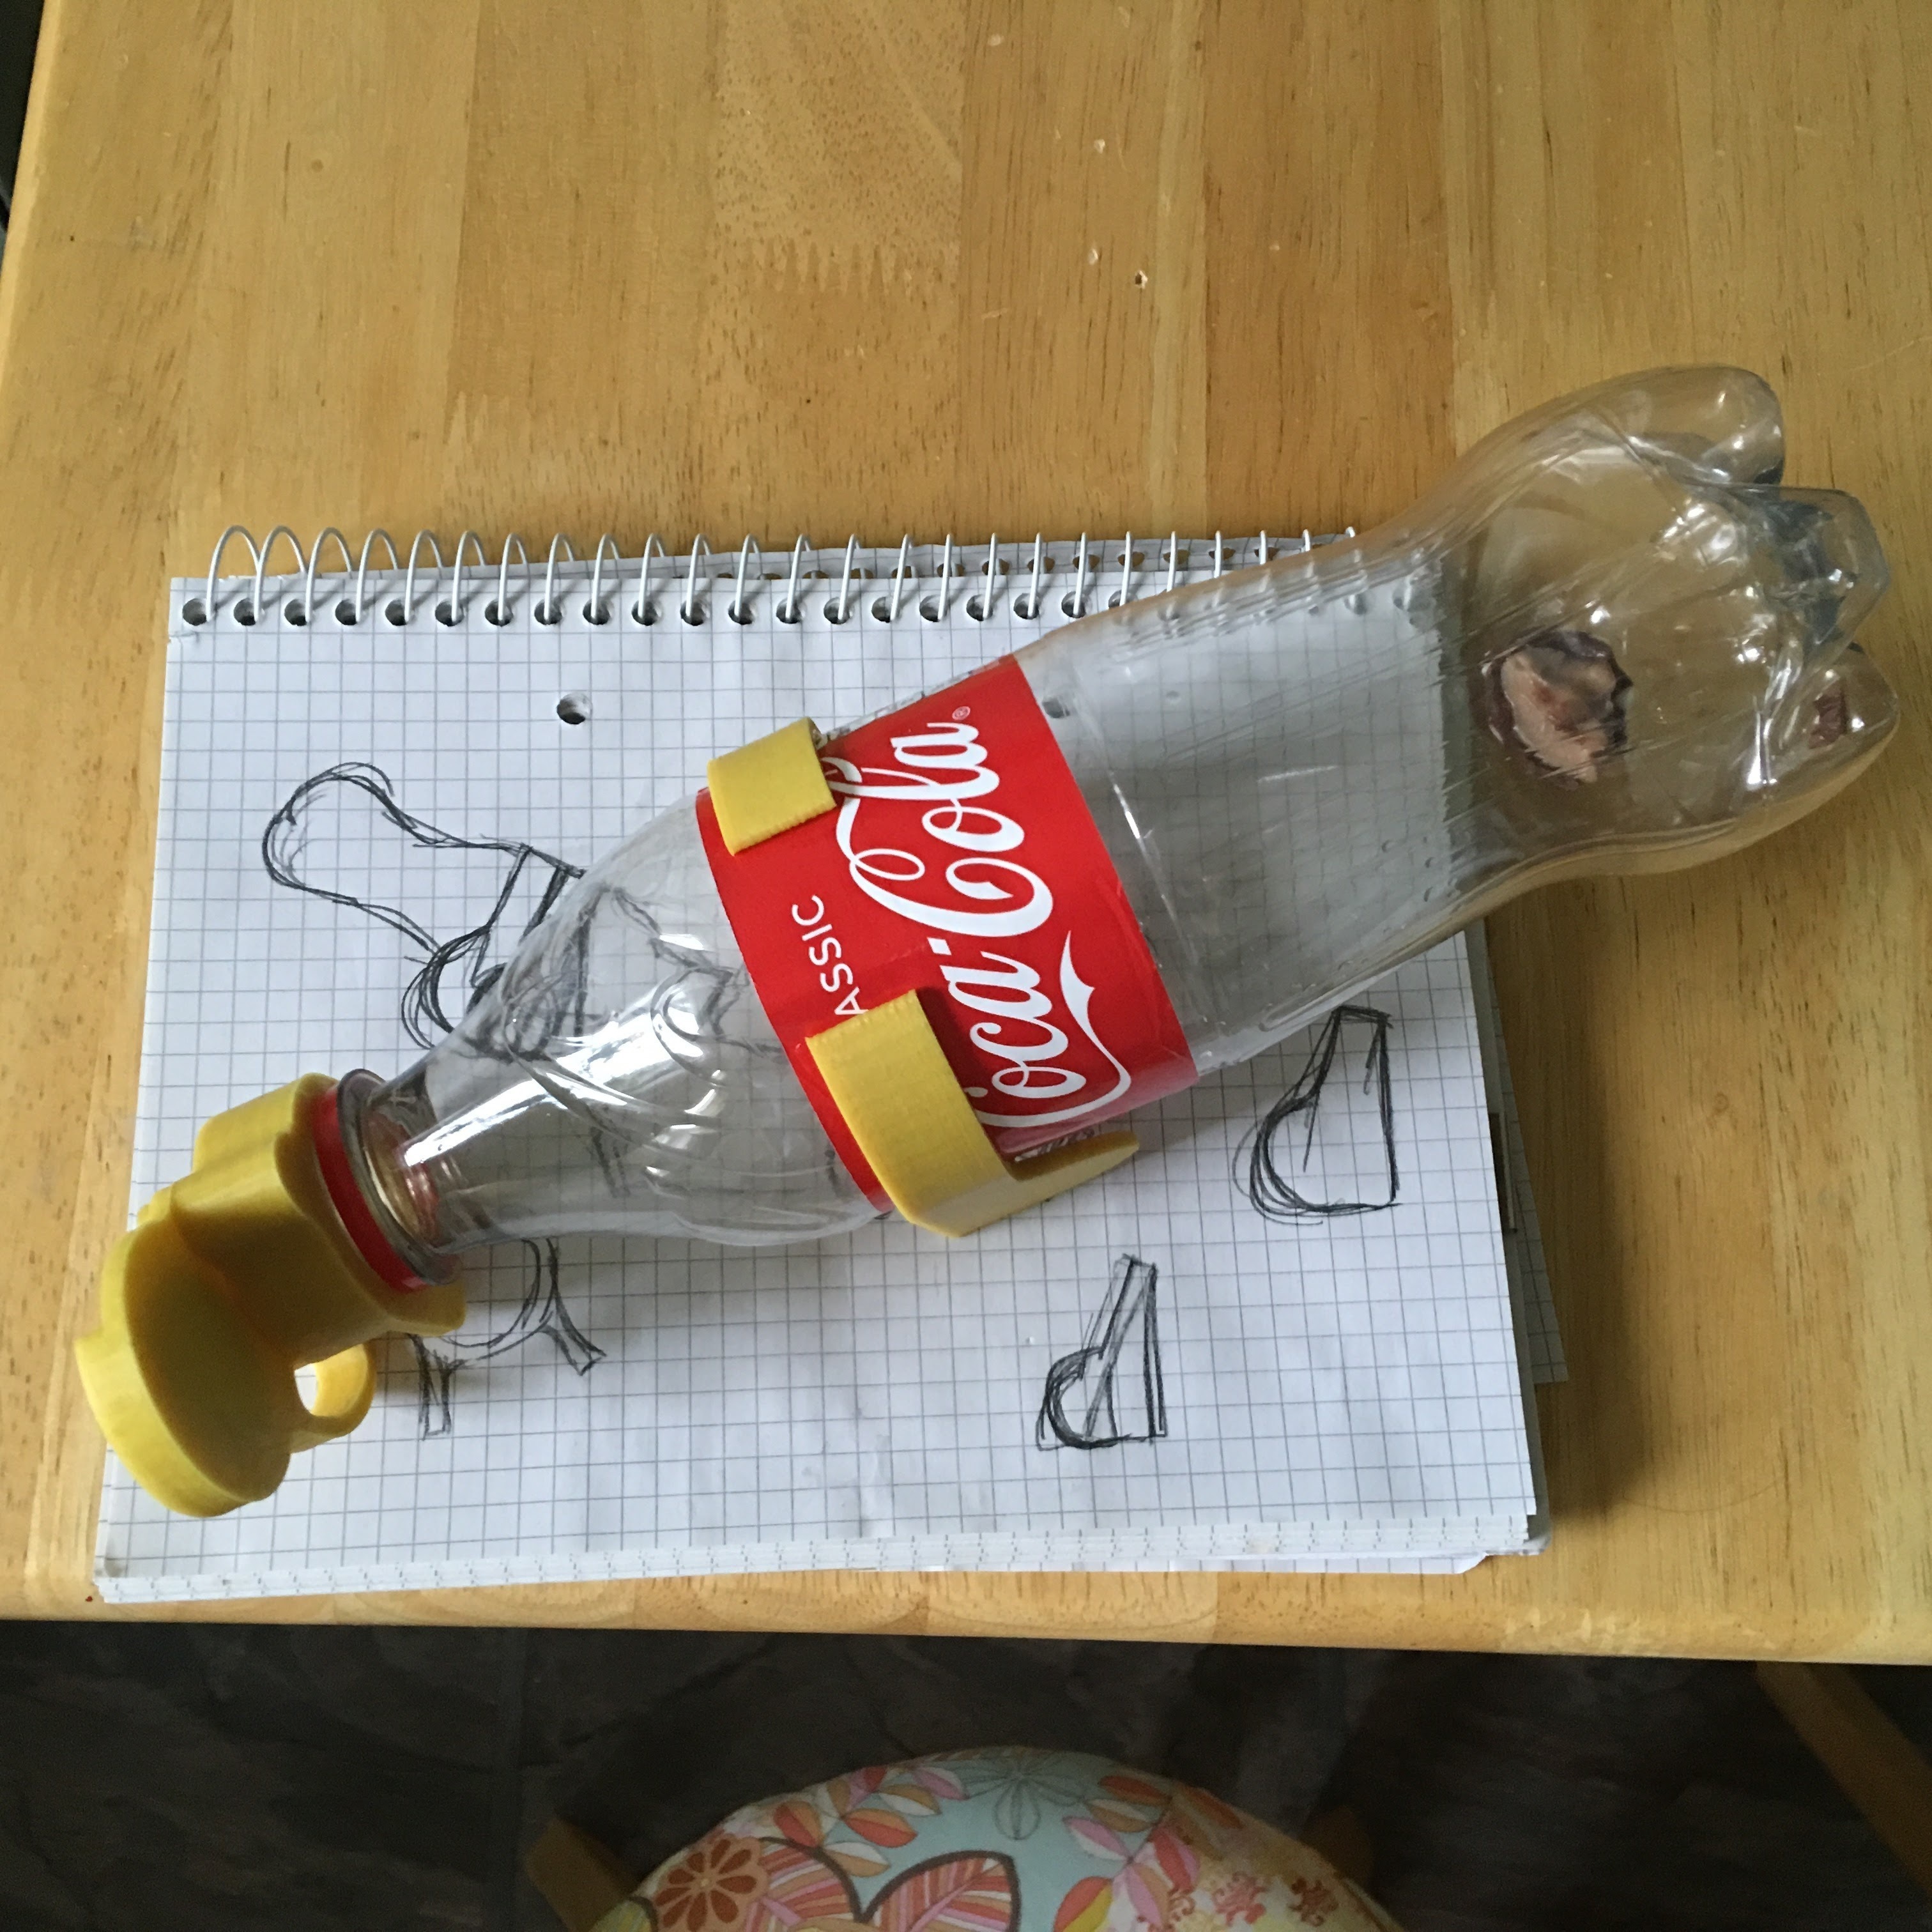 Clever non-lethal mousetrap made from soda bottle - Boing Boing